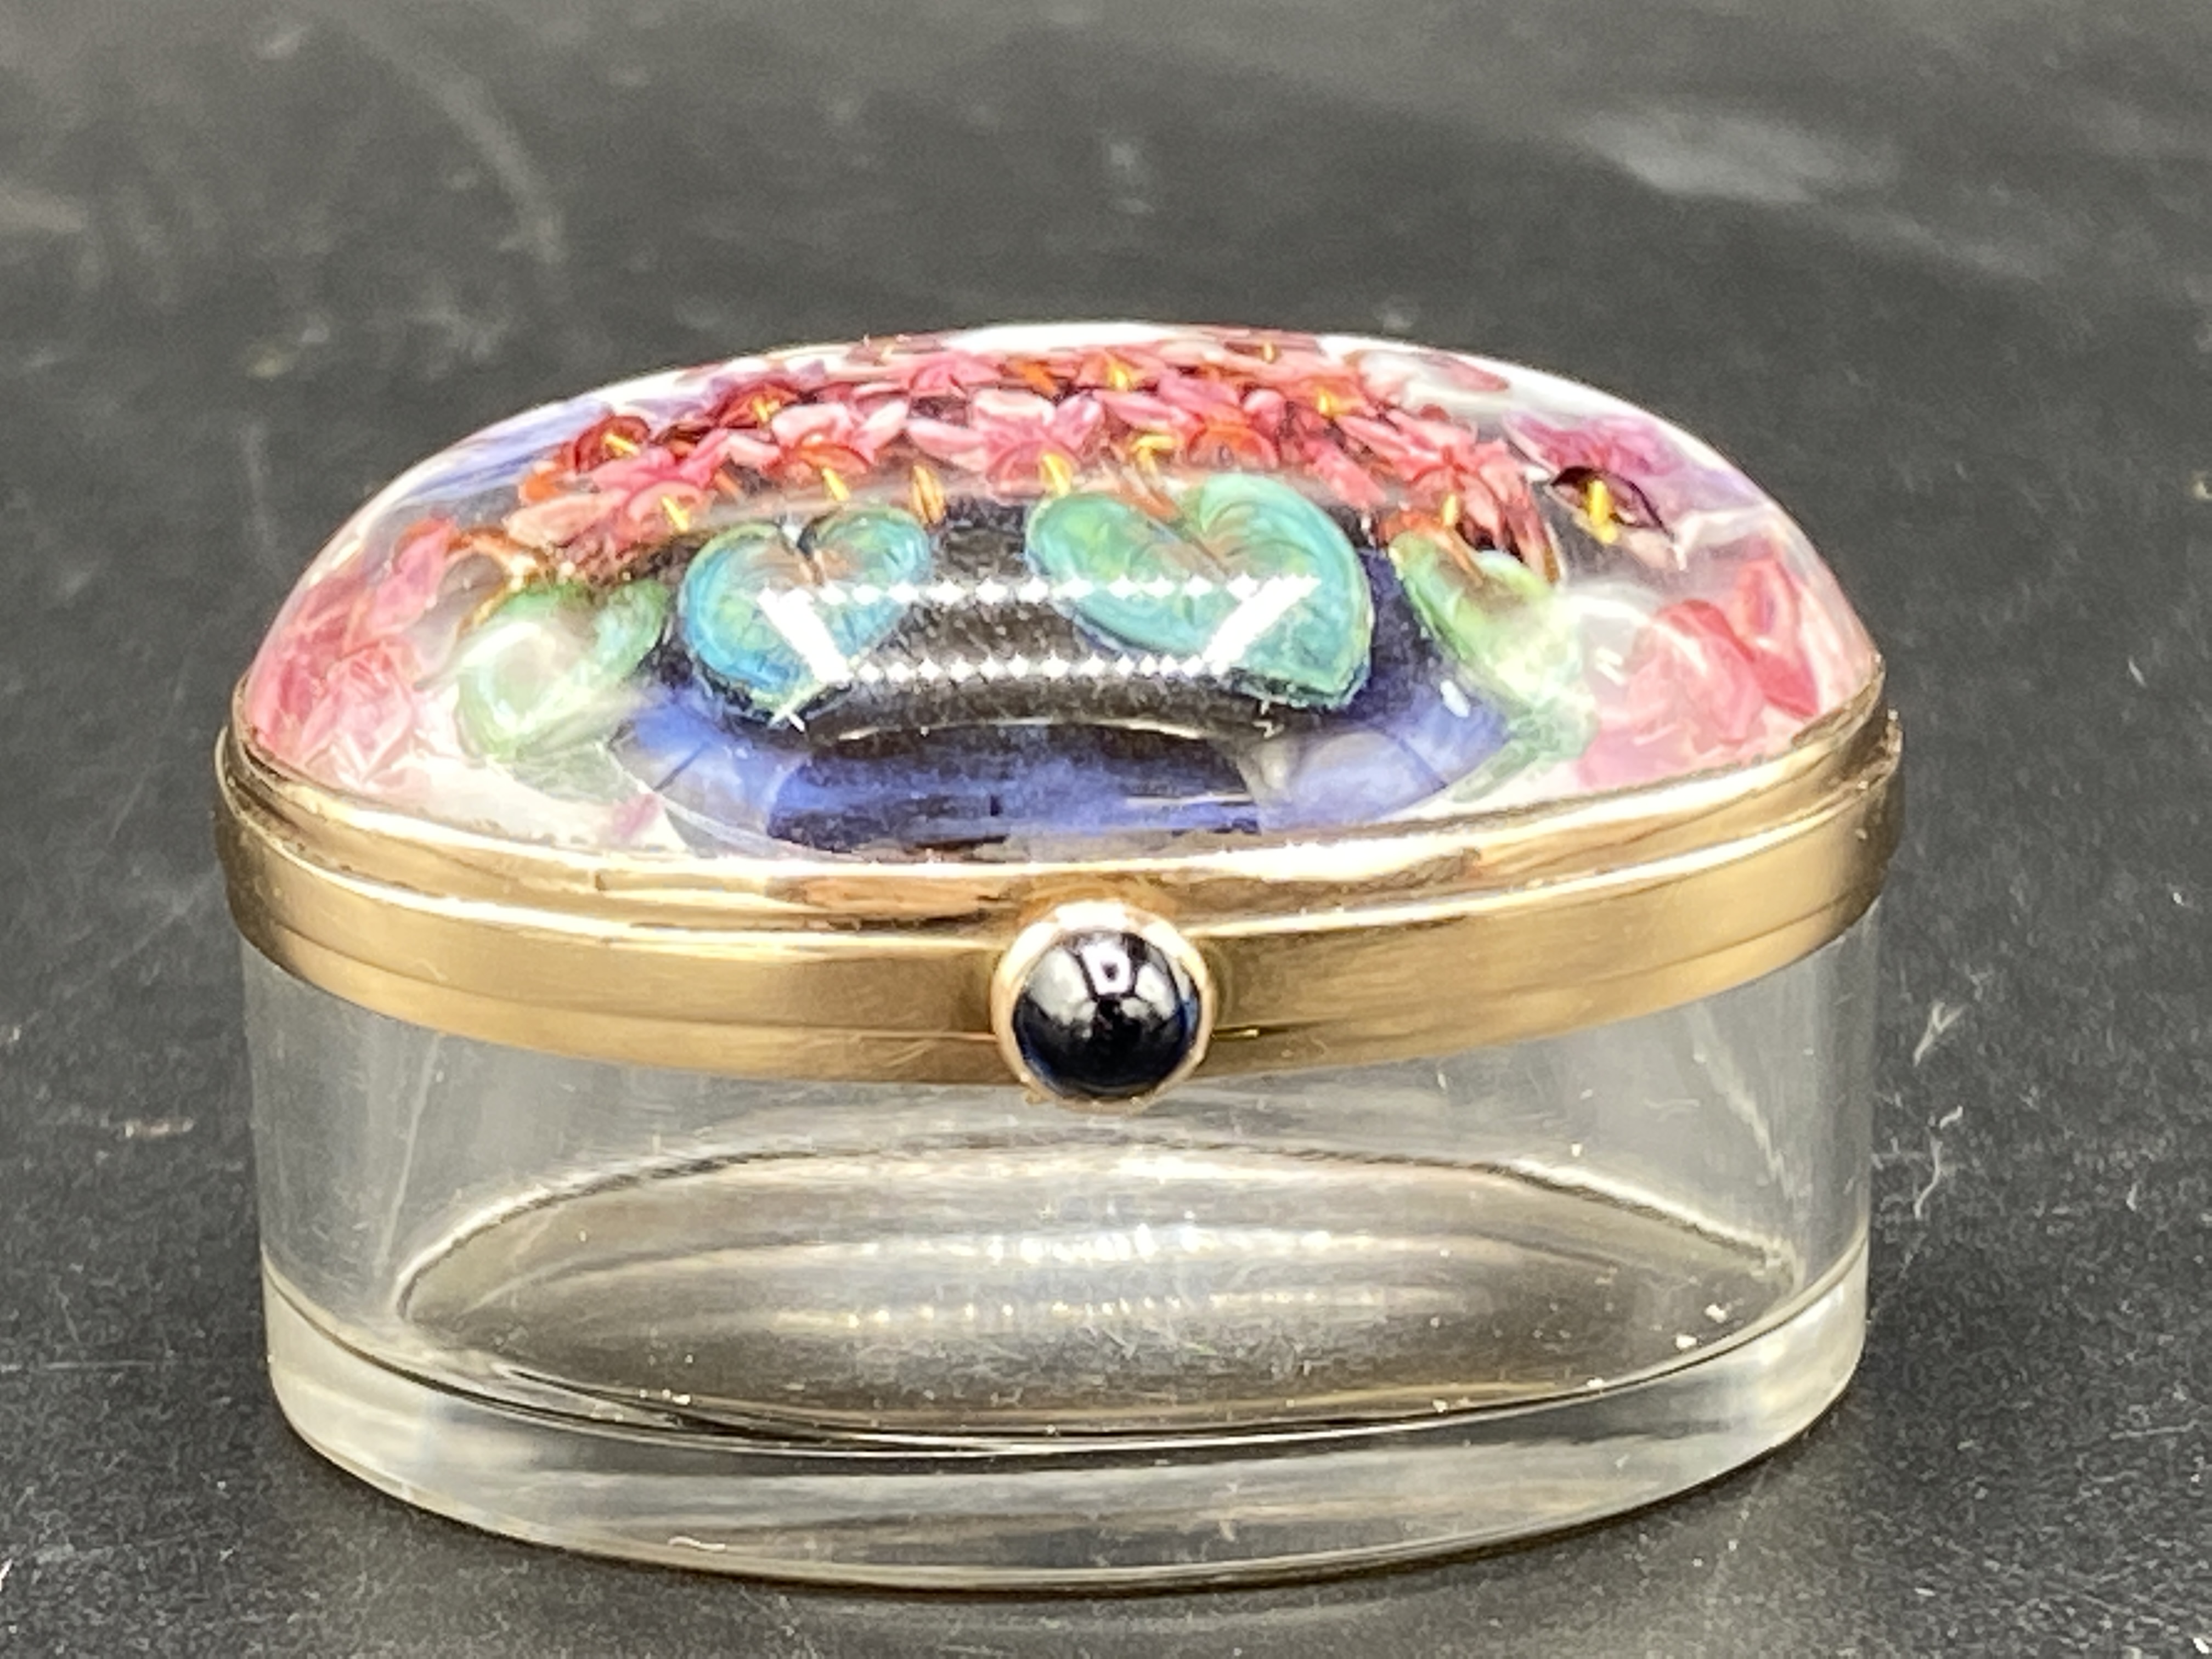 Essex crystal and gold pill box - Image 3 of 5